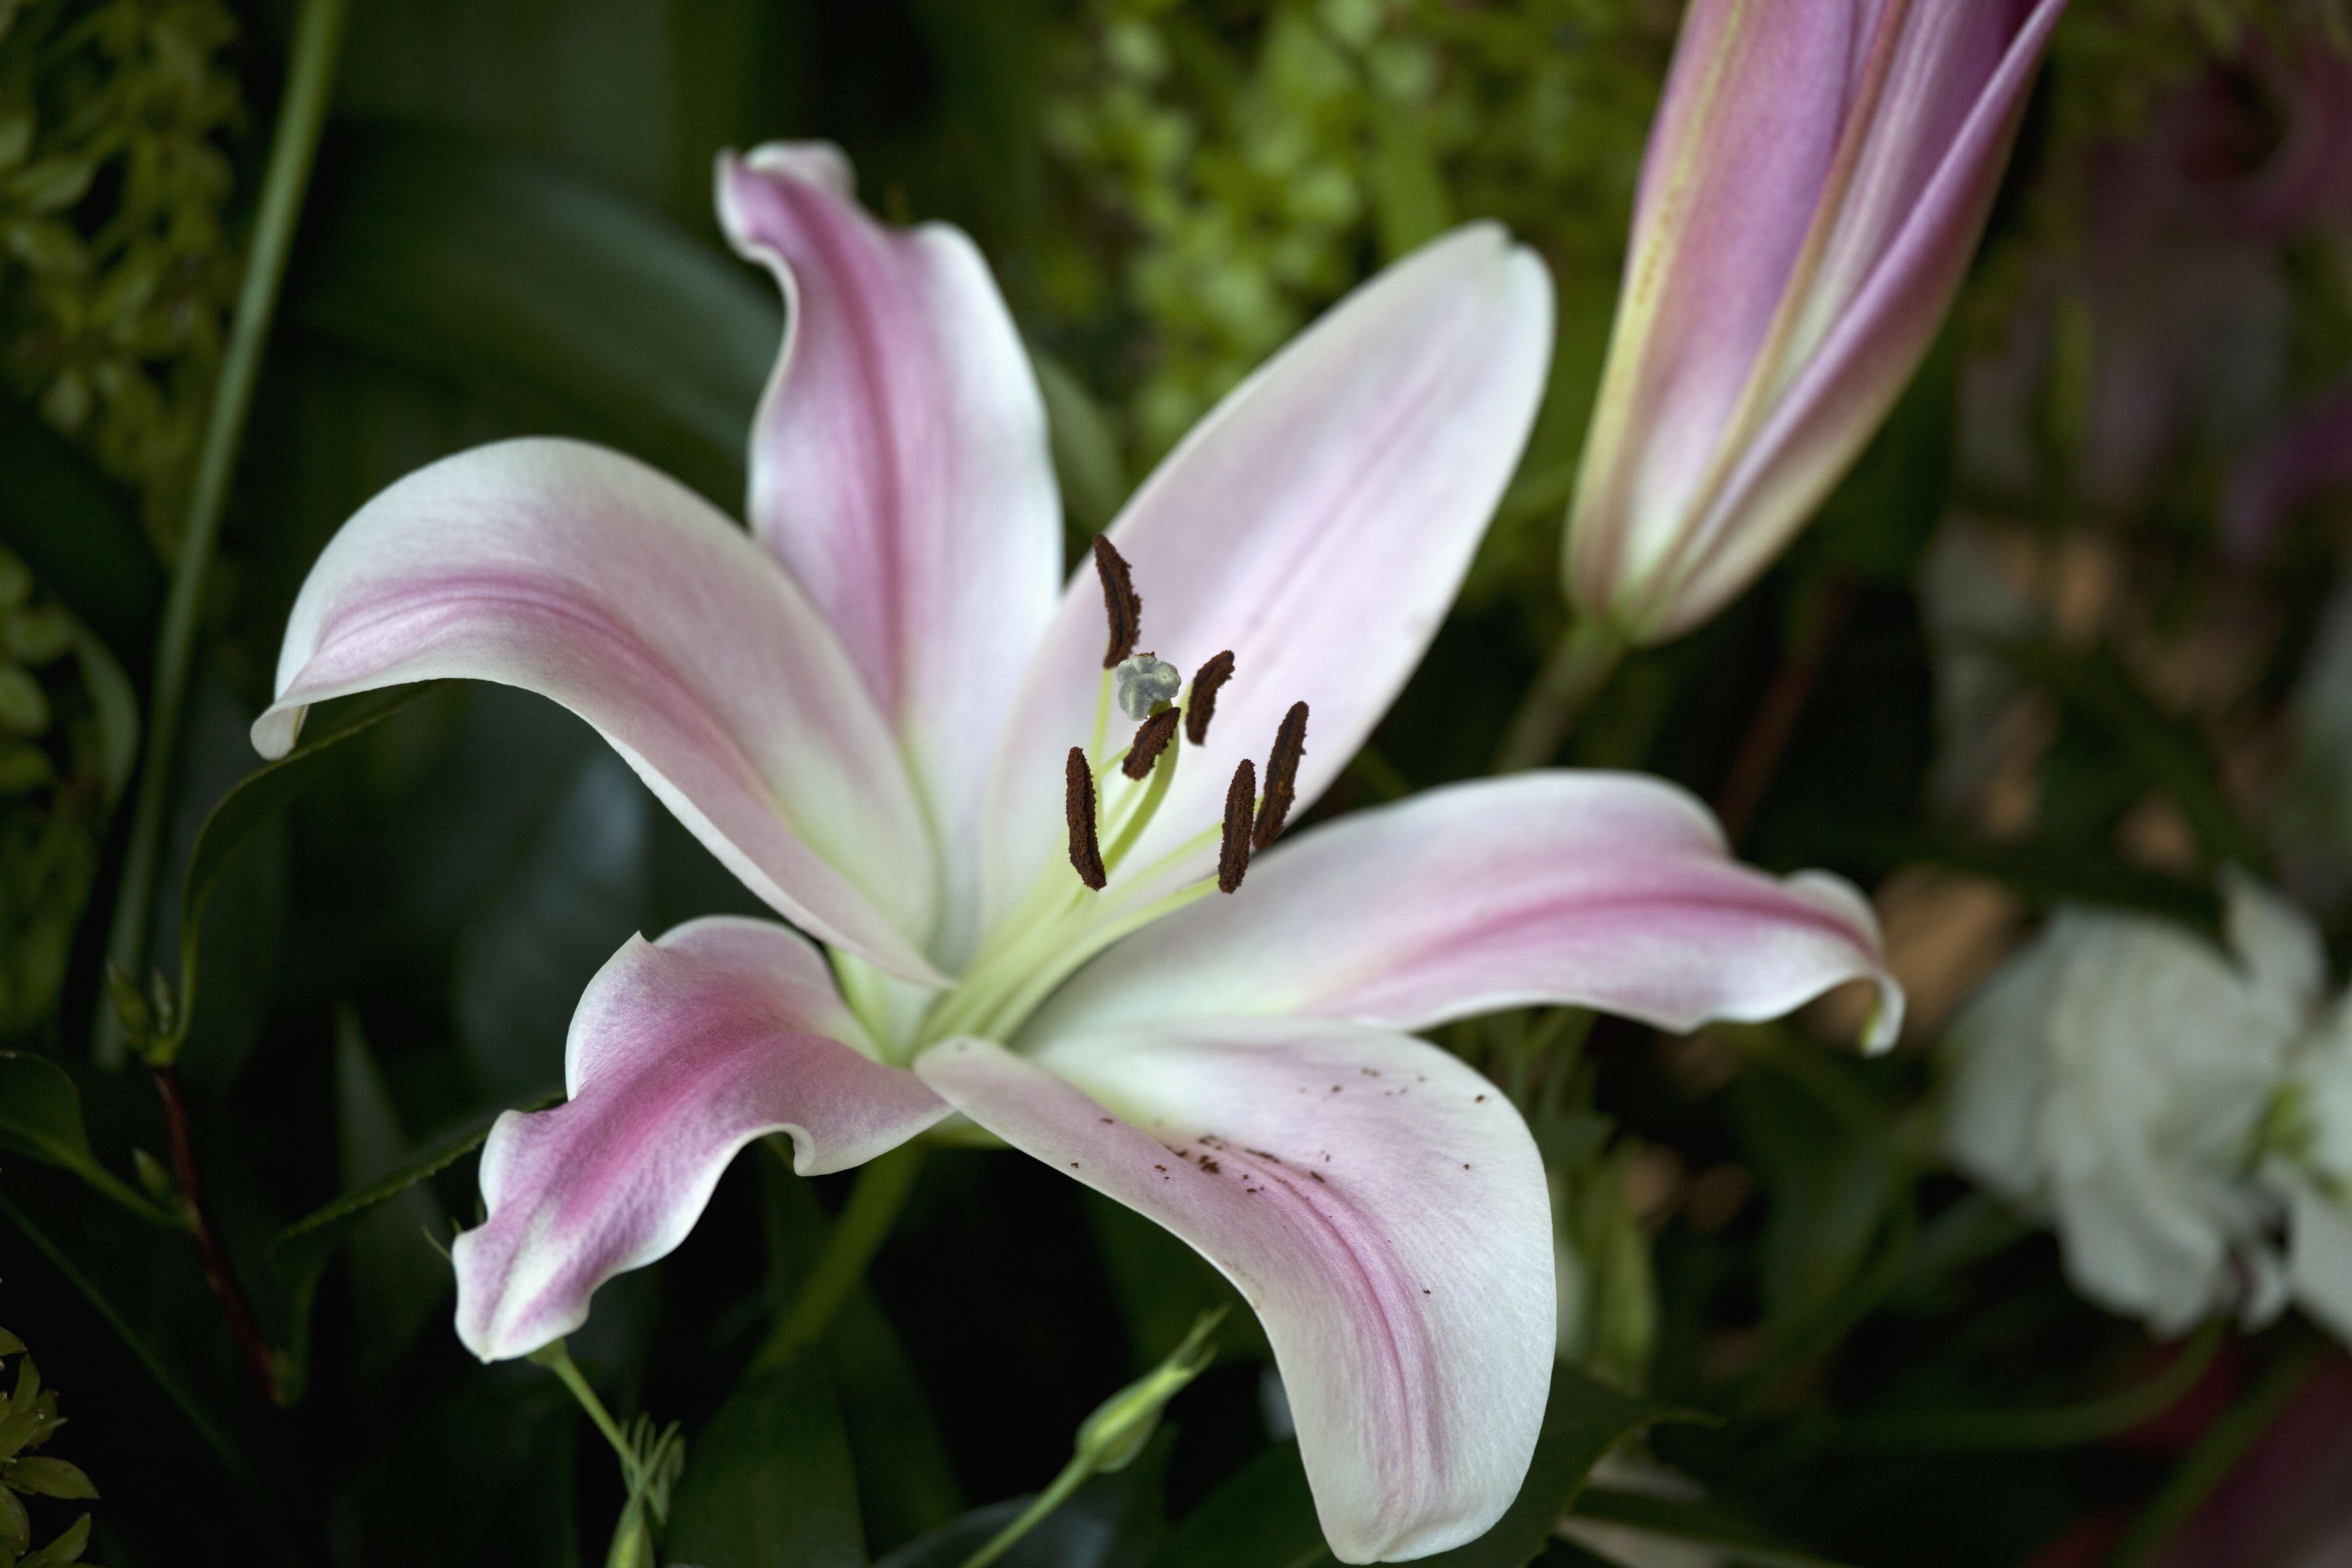 Variety of lily nyt